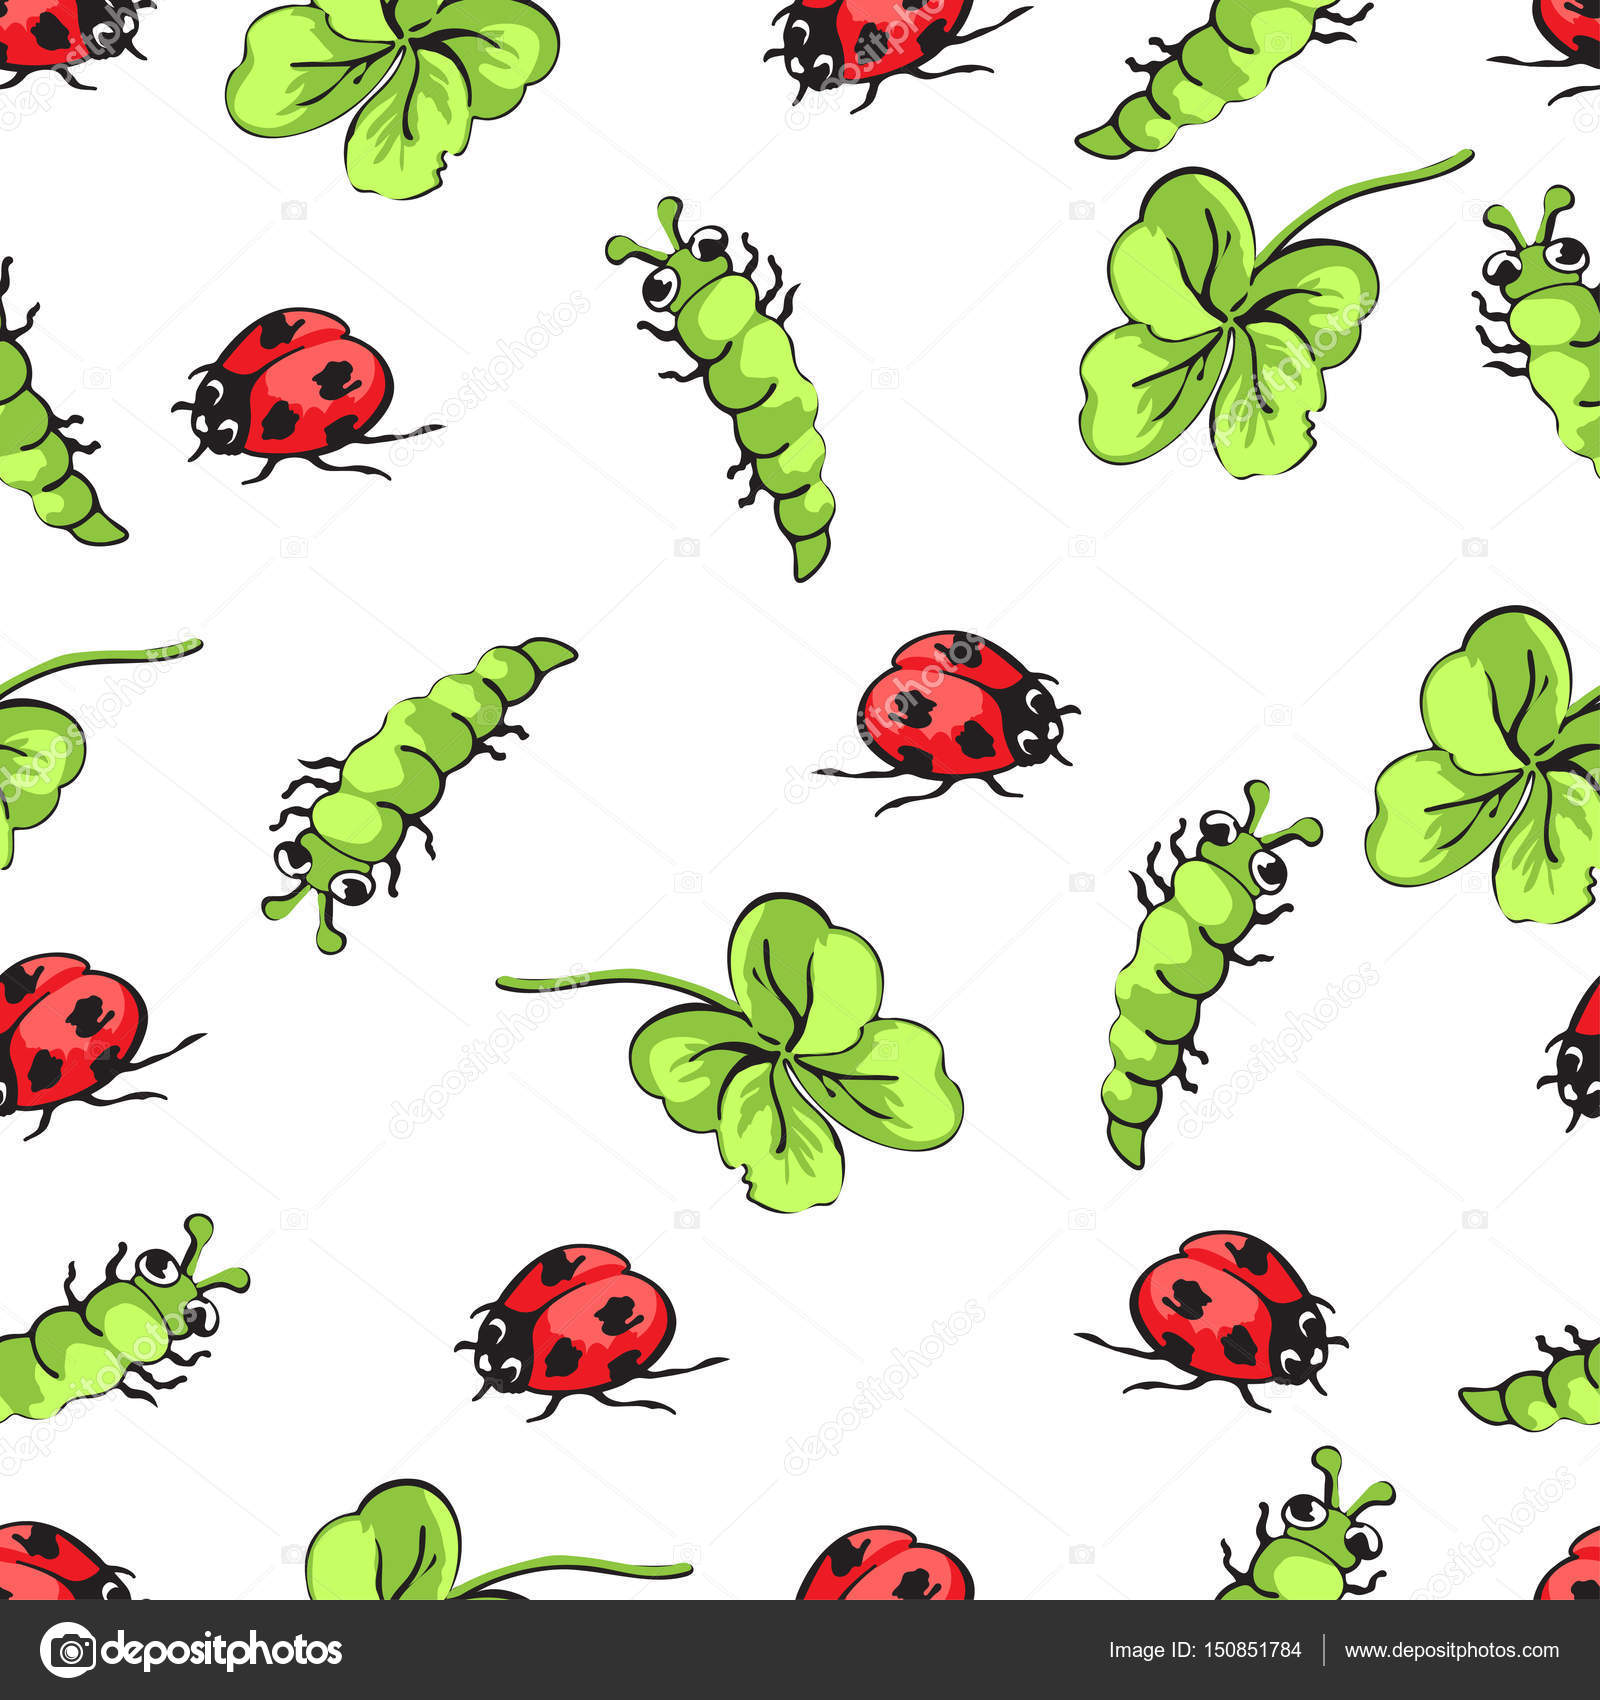 Green Vines on White with Beetles Fabric